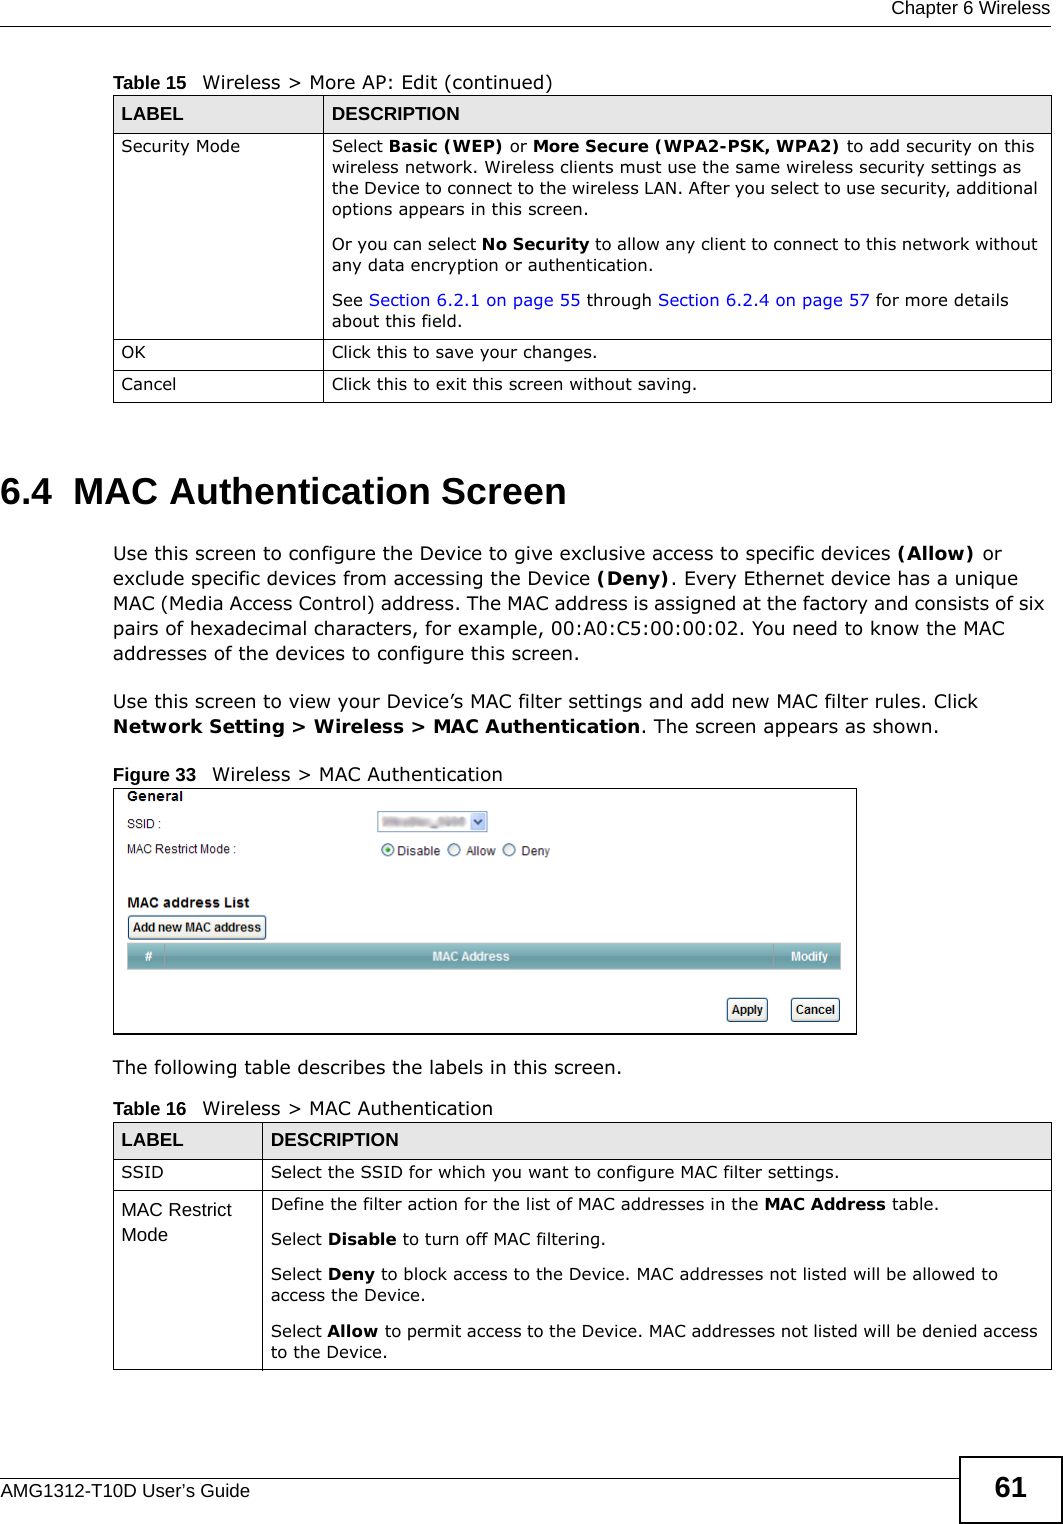  Chapter 6 WirelessAMG1312-T10D User’s Guide 616.4  MAC Authentication Screen Use this screen to configure the Device to give exclusive access to specific devices (Allow) or exclude specific devices from accessing the Device (Deny). Every Ethernet device has a unique MAC (Media Access Control) address. The MAC address is assigned at the factory and consists of six pairs of hexadecimal characters, for example, 00:A0:C5:00:00:02. You need to know the MAC addresses of the devices to configure this screen.Use this screen to view your Device’s MAC filter settings and add new MAC filter rules. Click Network Setting &gt; Wireless &gt; MAC Authentication. The screen appears as shown.Figure 33   Wireless &gt; MAC AuthenticationThe following table describes the labels in this screen.Security Mode Select Basic (WEP) or More Secure (WPA2-PSK, WPA2) to add security on this wireless network. Wireless clients must use the same wireless security settings as the Device to connect to the wireless LAN. After you select to use security, additional options appears in this screen. Or you can select No Security to allow any client to connect to this network without any data encryption or authentication.See Section 6.2.1 on page 55 through Section 6.2.4 on page 57 for more details about this field.OK Click this to save your changes.Cancel Click this to exit this screen without saving.Table 15   Wireless &gt; More AP: Edit (continued)LABEL DESCRIPTIONTable 16   Wireless &gt; MAC AuthenticationLABEL DESCRIPTIONSSID Select the SSID for which you want to configure MAC filter settings.MAC Restrict Mode Define the filter action for the list of MAC addresses in the MAC Address table. Select Disable to turn off MAC filtering.Select Deny to block access to the Device. MAC addresses not listed will be allowed to access the Device. Select Allow to permit access to the Device. MAC addresses not listed will be denied access to the Device. 